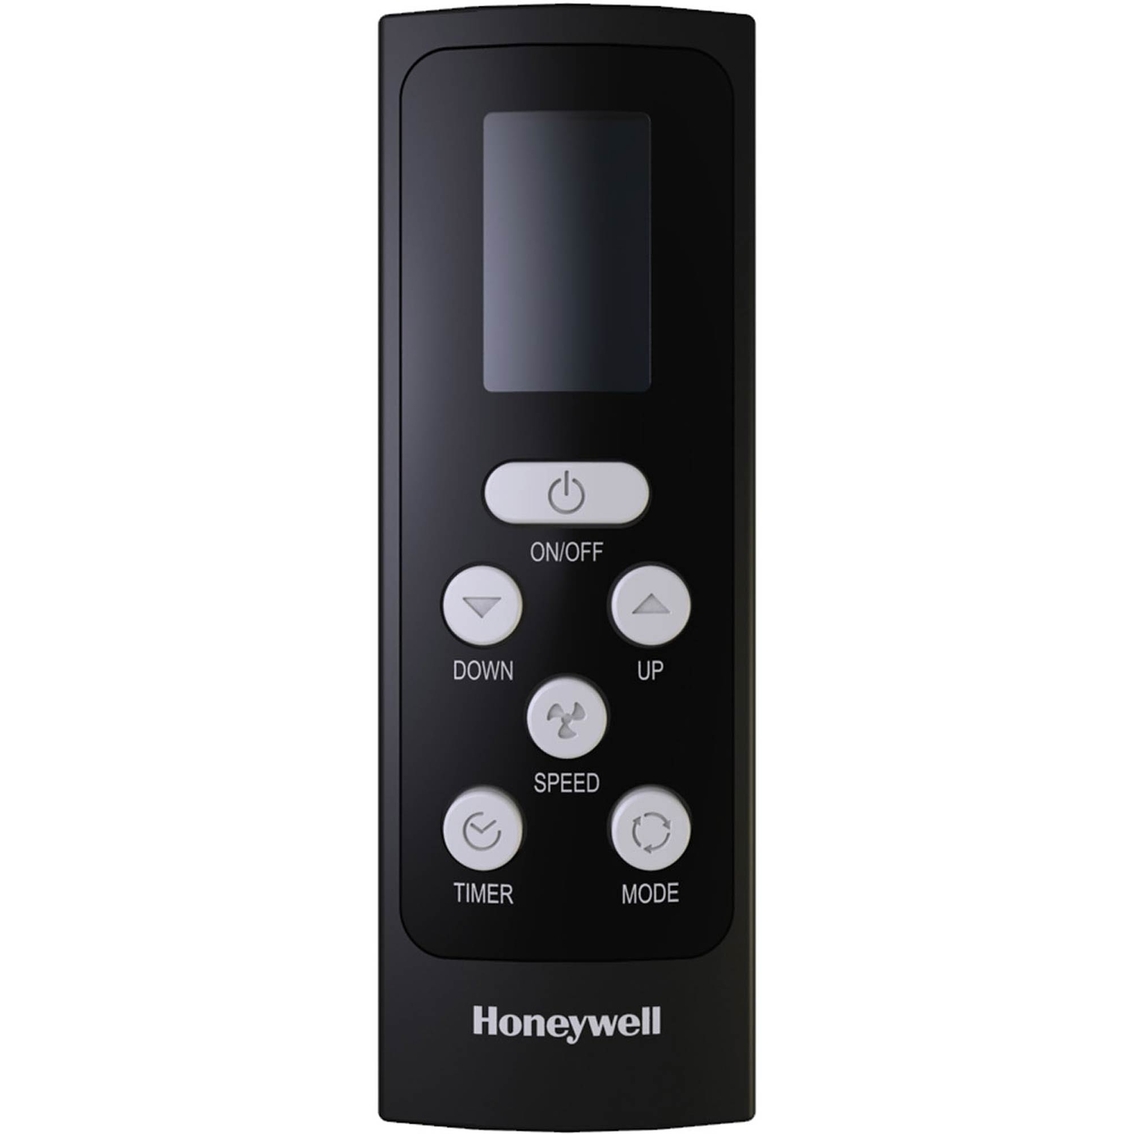 Honeywell 14,000 BTU Portable Air Conditioner with Remote Control, Black/Silver - Image 4 of 4